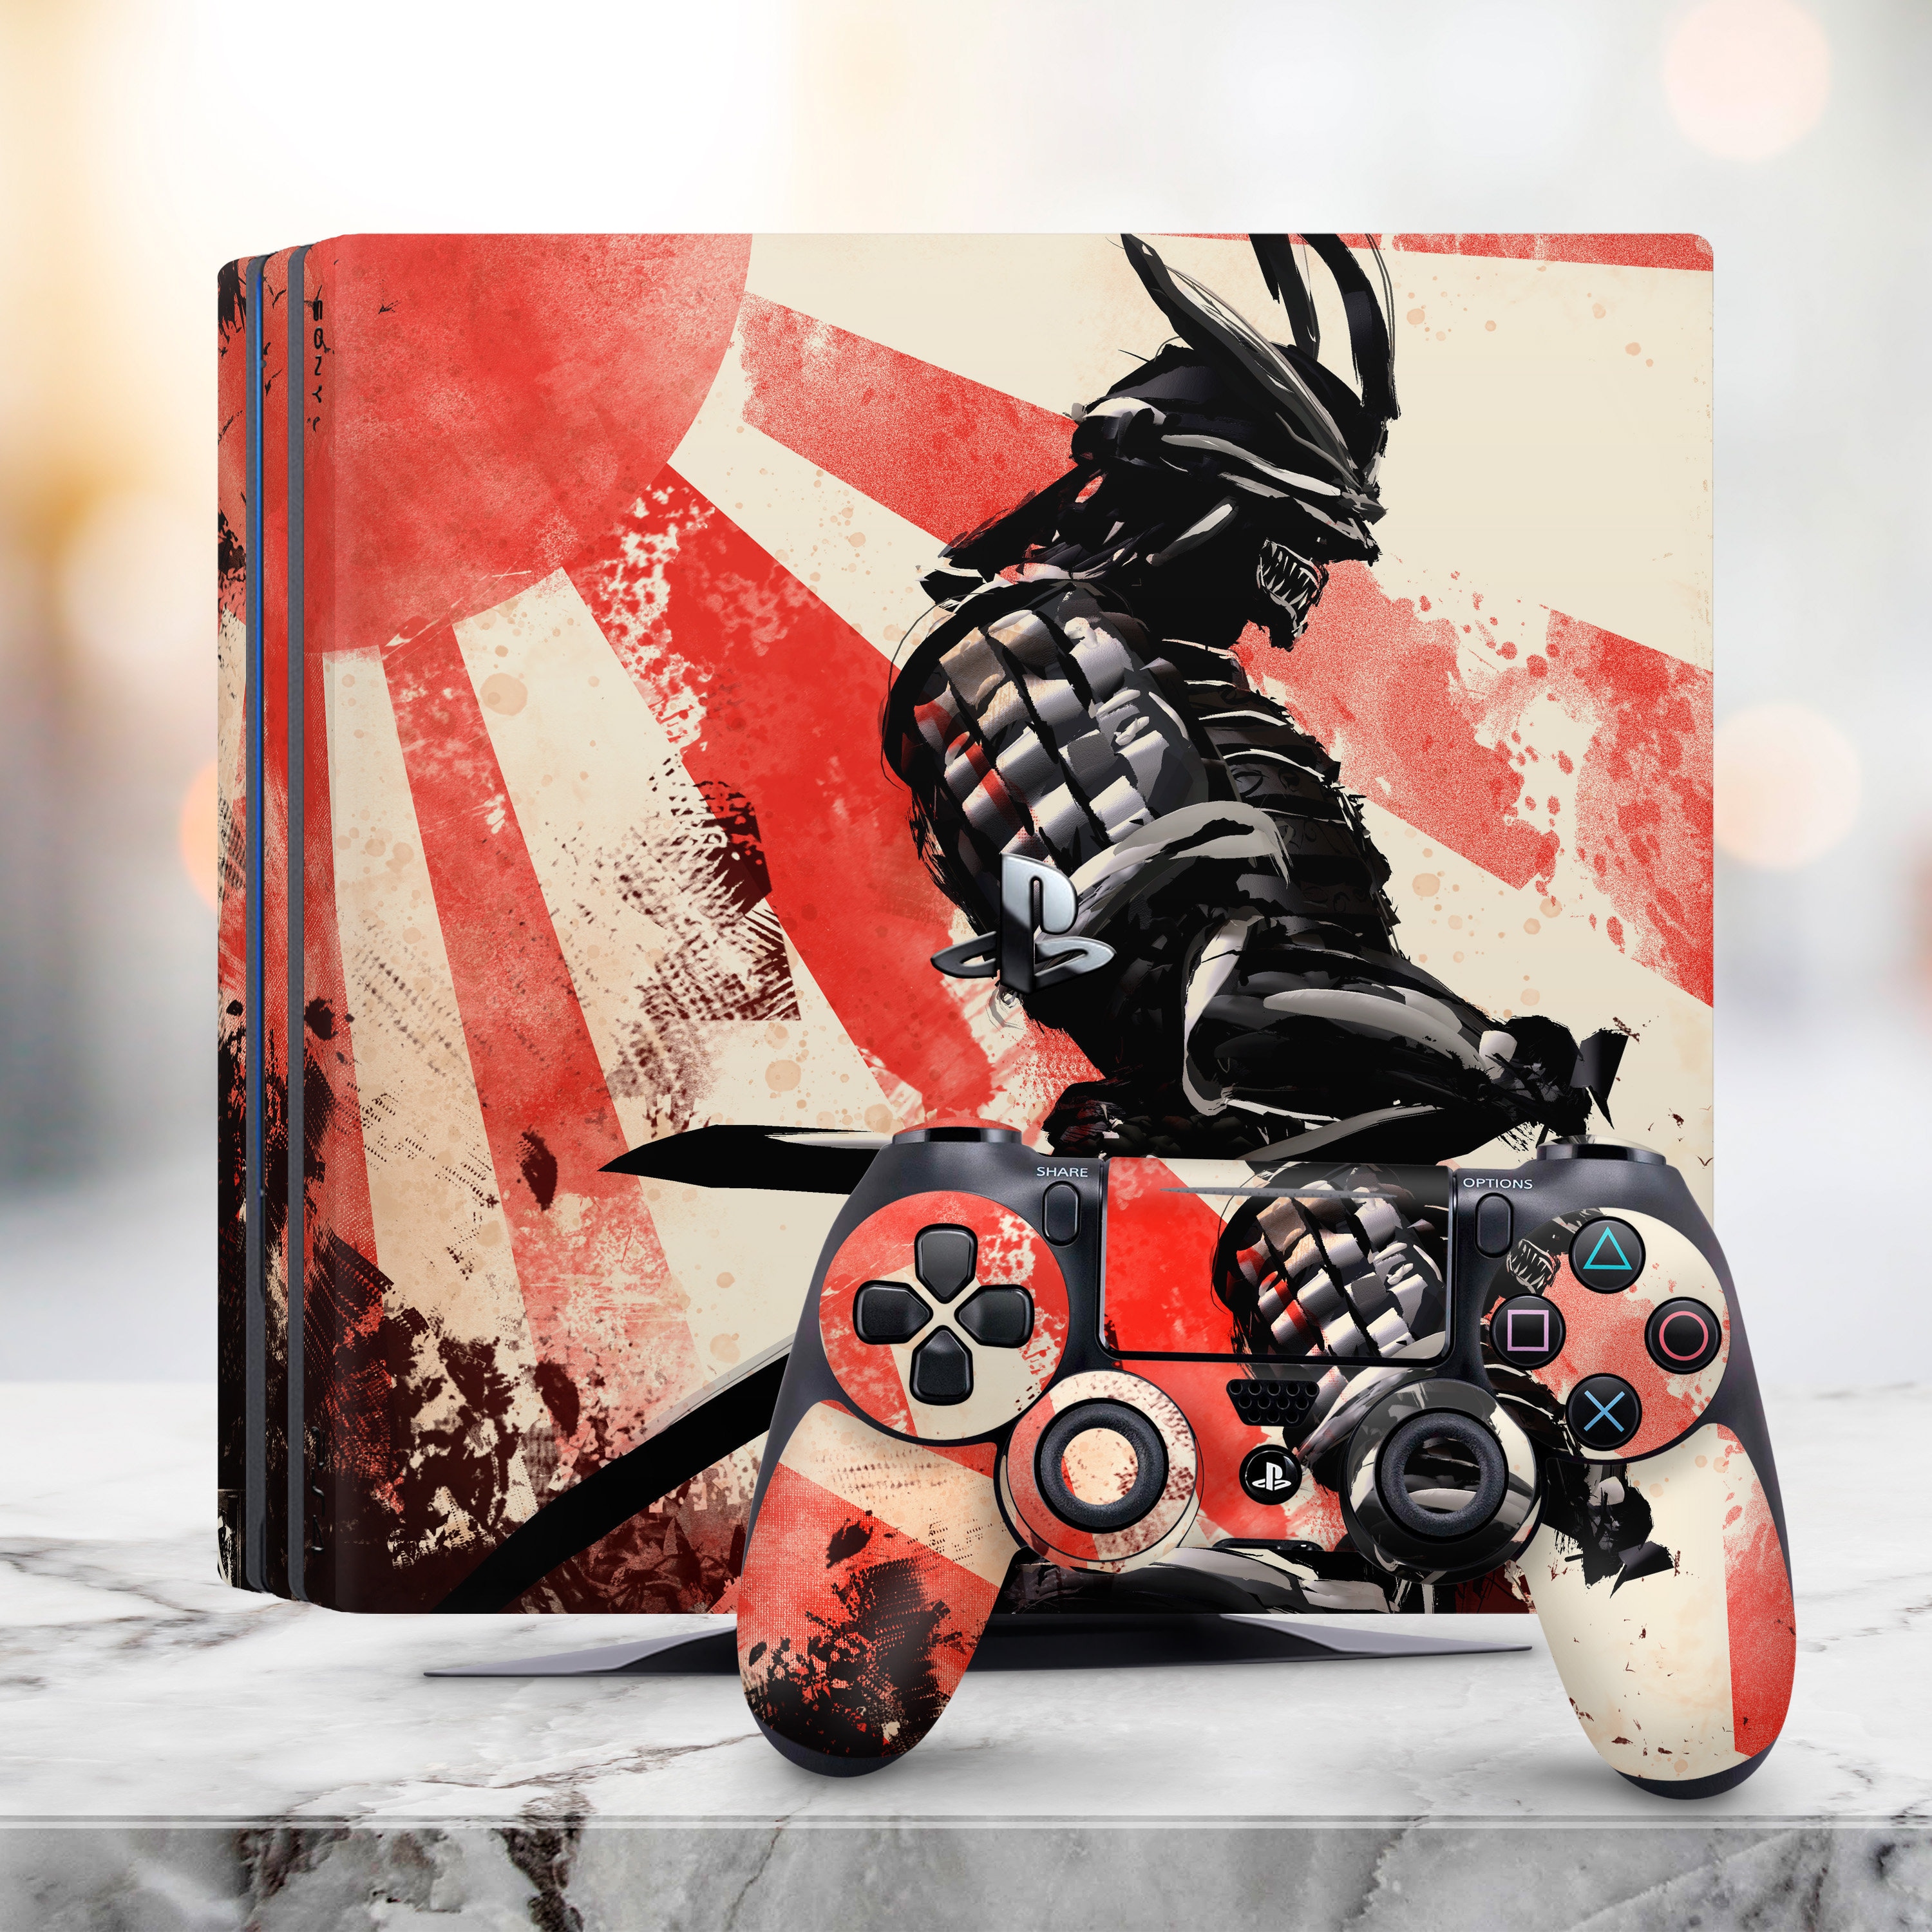 PS5 Akatsuki Skin Sticker Console and Controller Skins Set Anime Vinyl Cover Sticker Wraps for Playstation 5 Protective Cover Disc Edition Akatsuki 